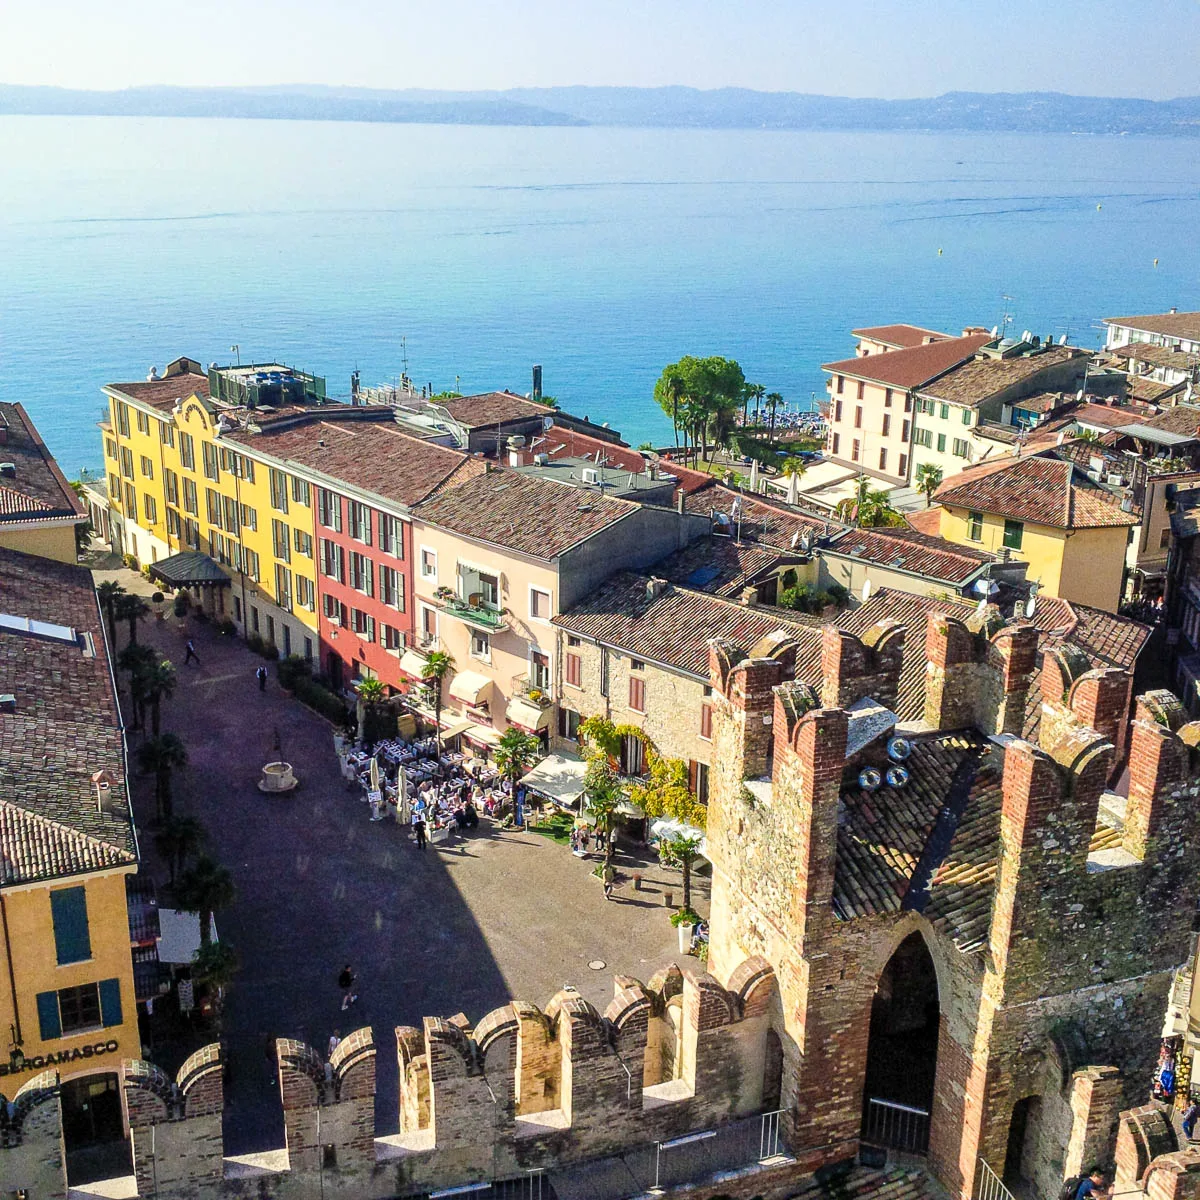 The view from the Scaliger Castle - Sirmione, Garda Lake, Italy - www.rossiwrites.com